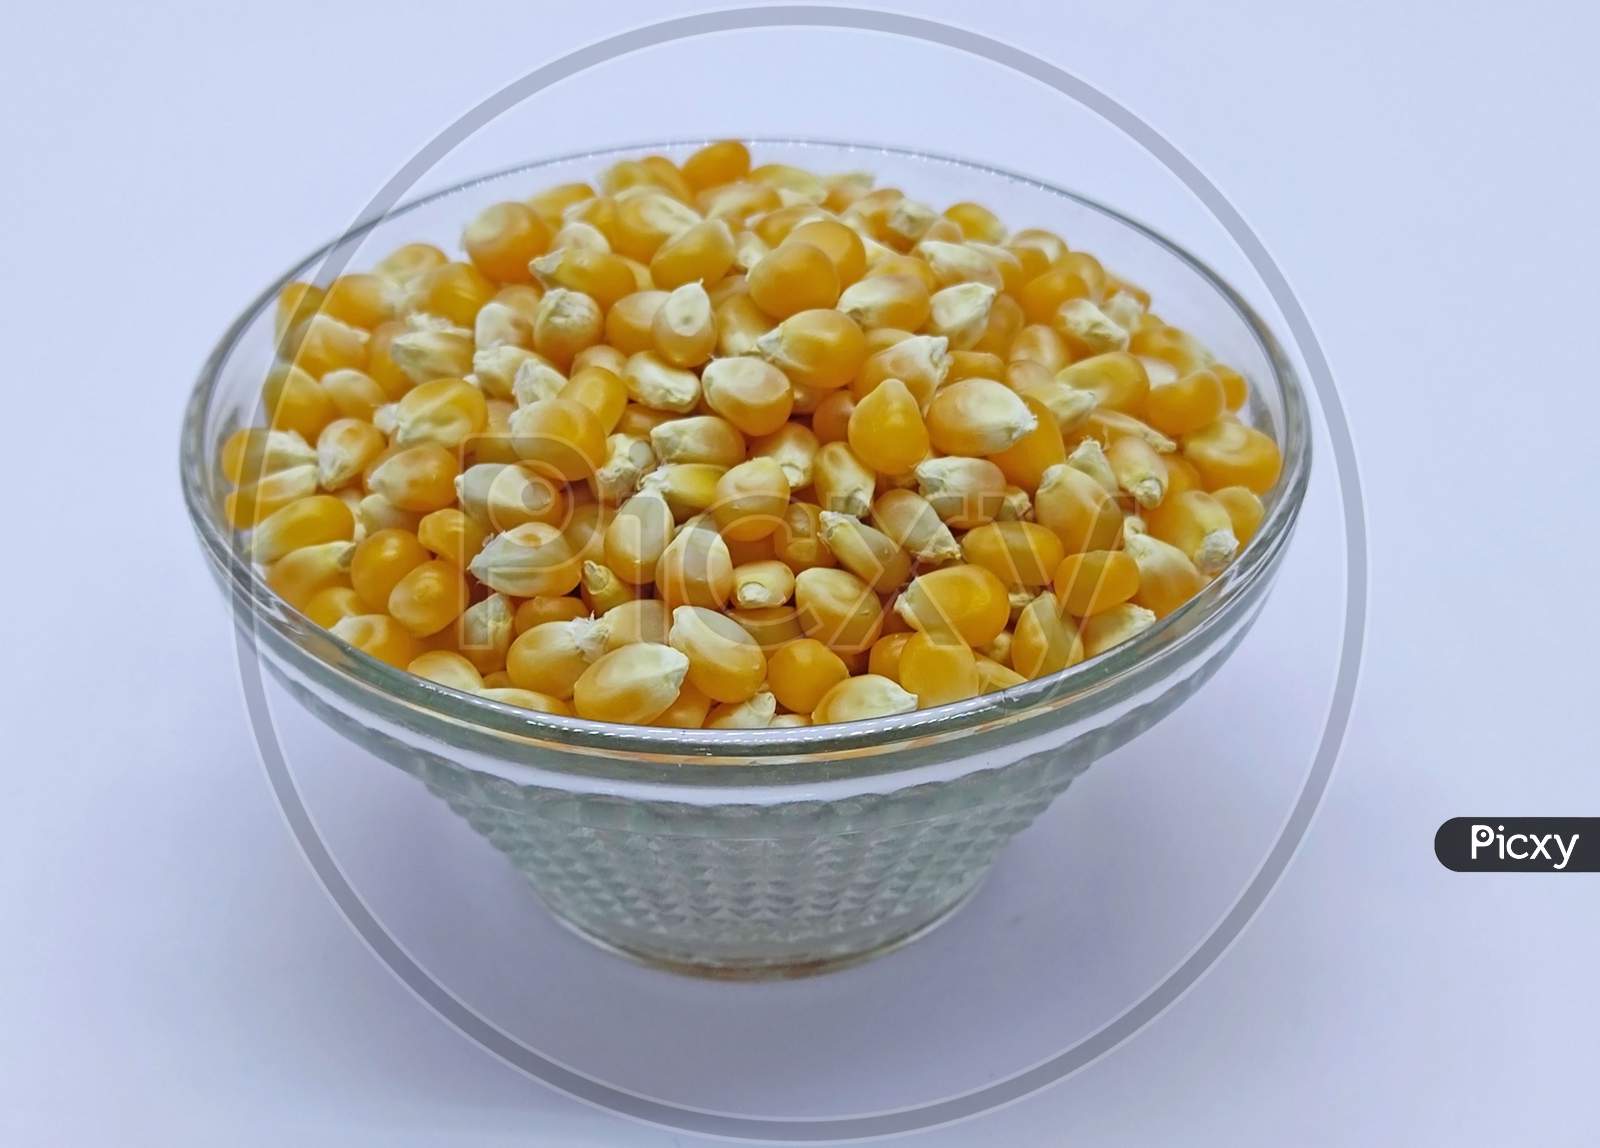 Corn Kernels, Corns Seeds, Yellow Dry Corn Grains In Bowl On White Background